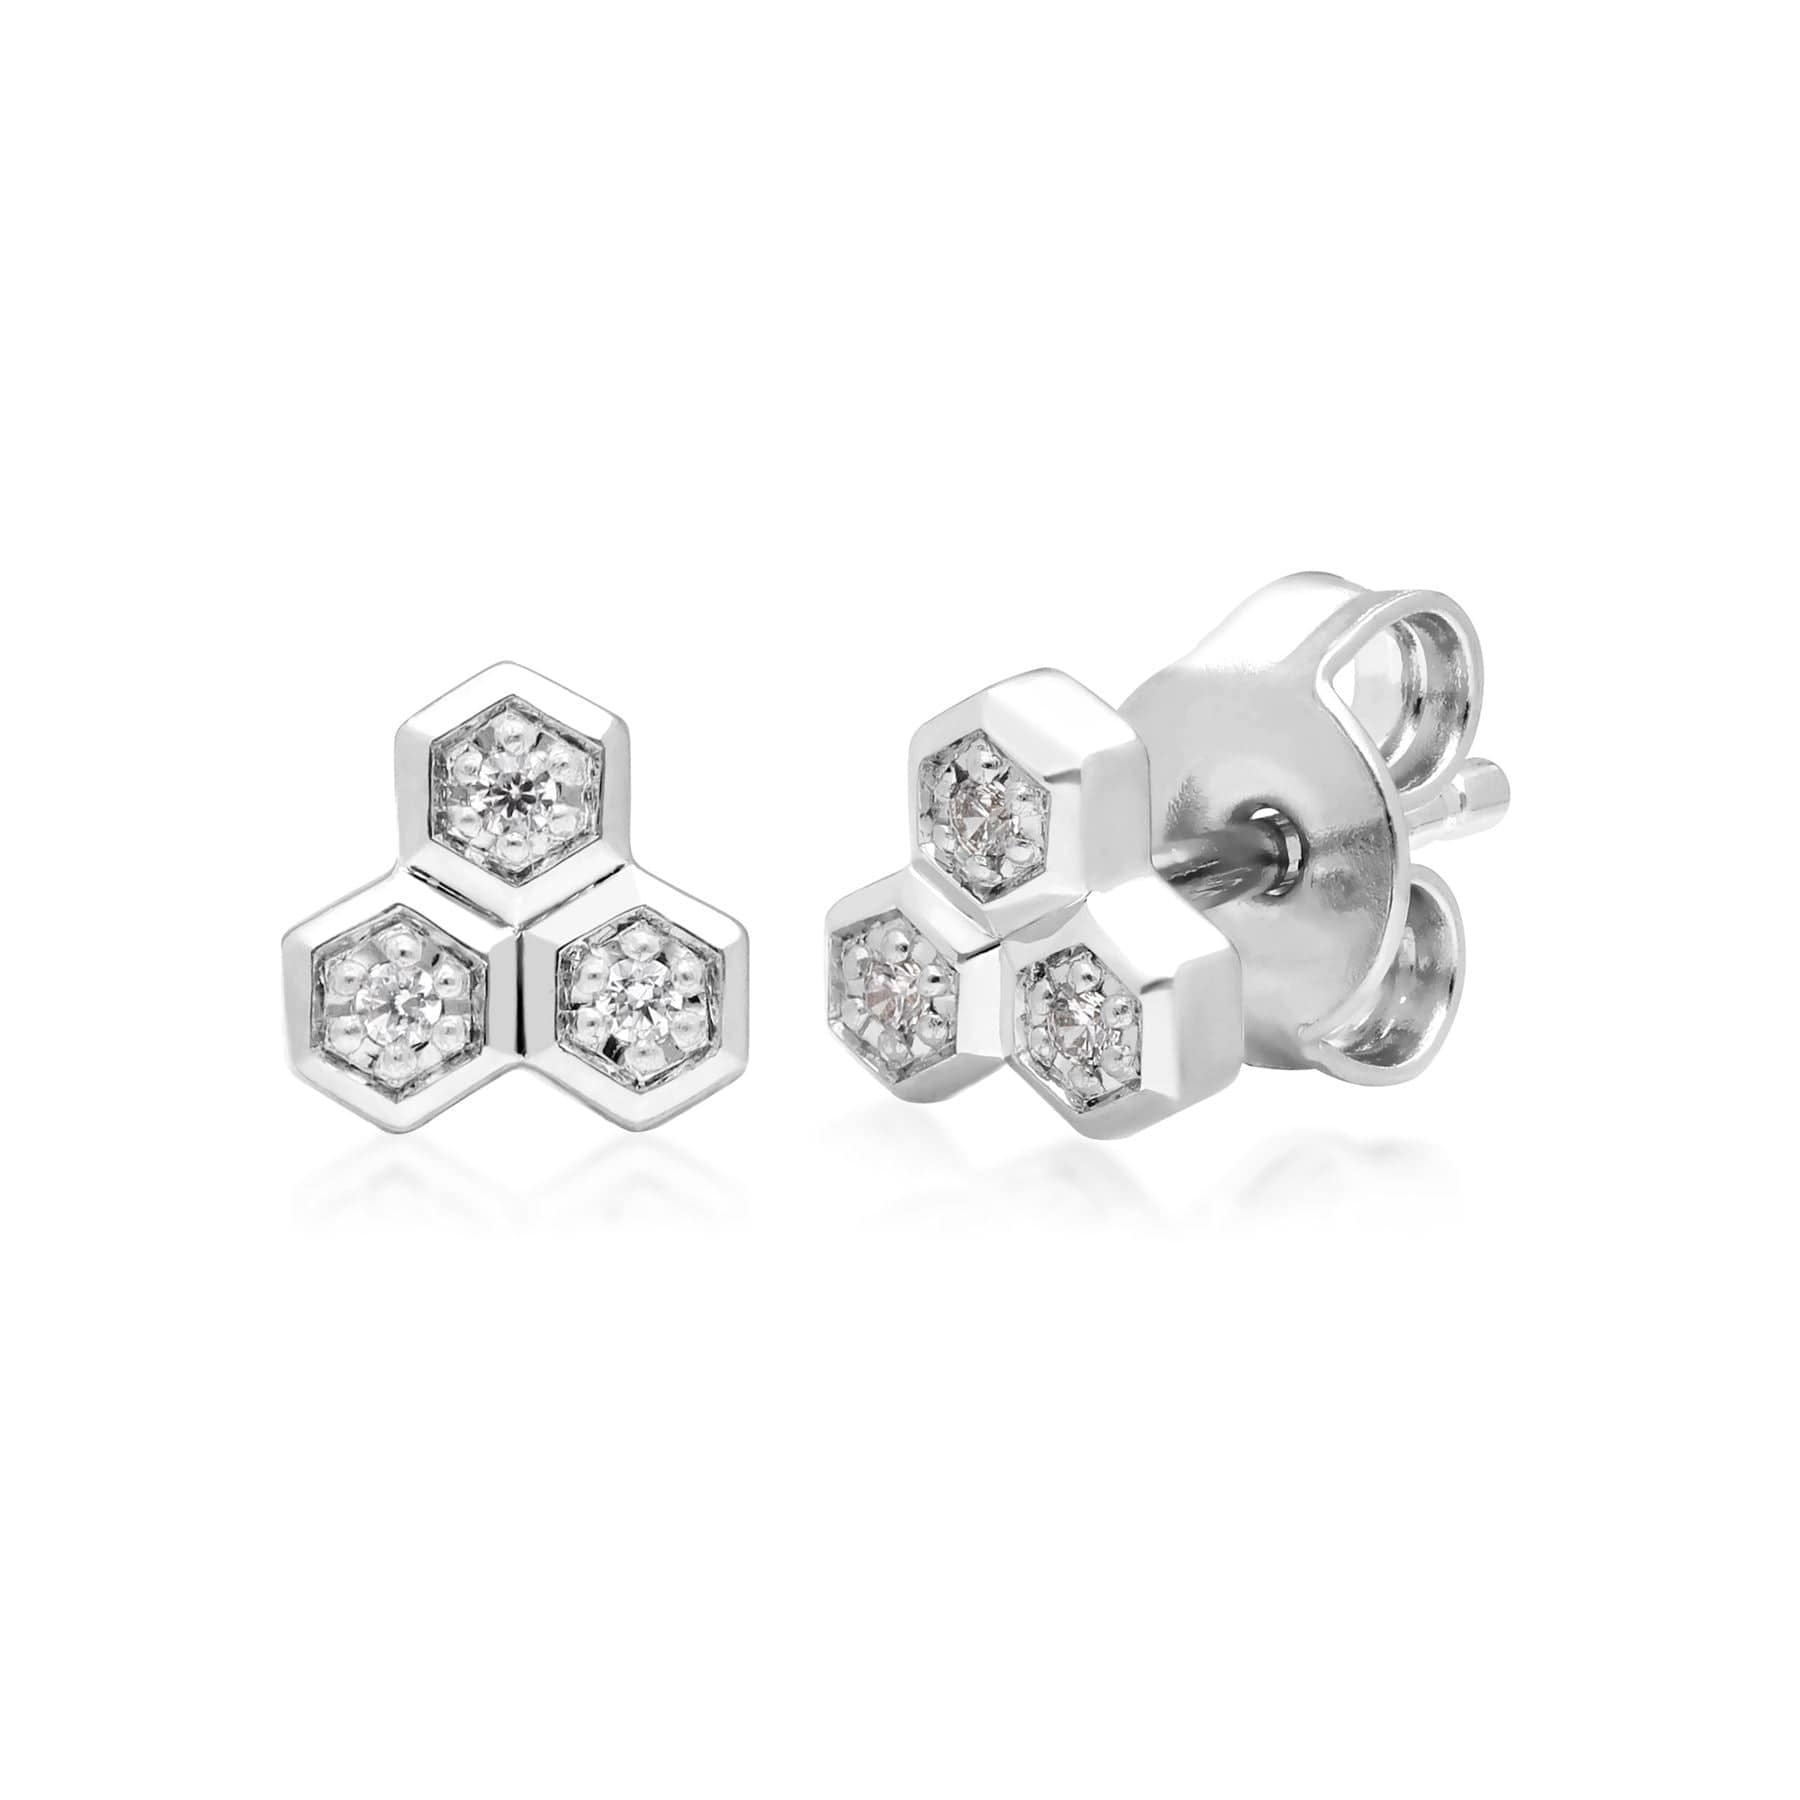 Image of Diamond Geometric Trilogy Stud Earrings in 9ct White Gold